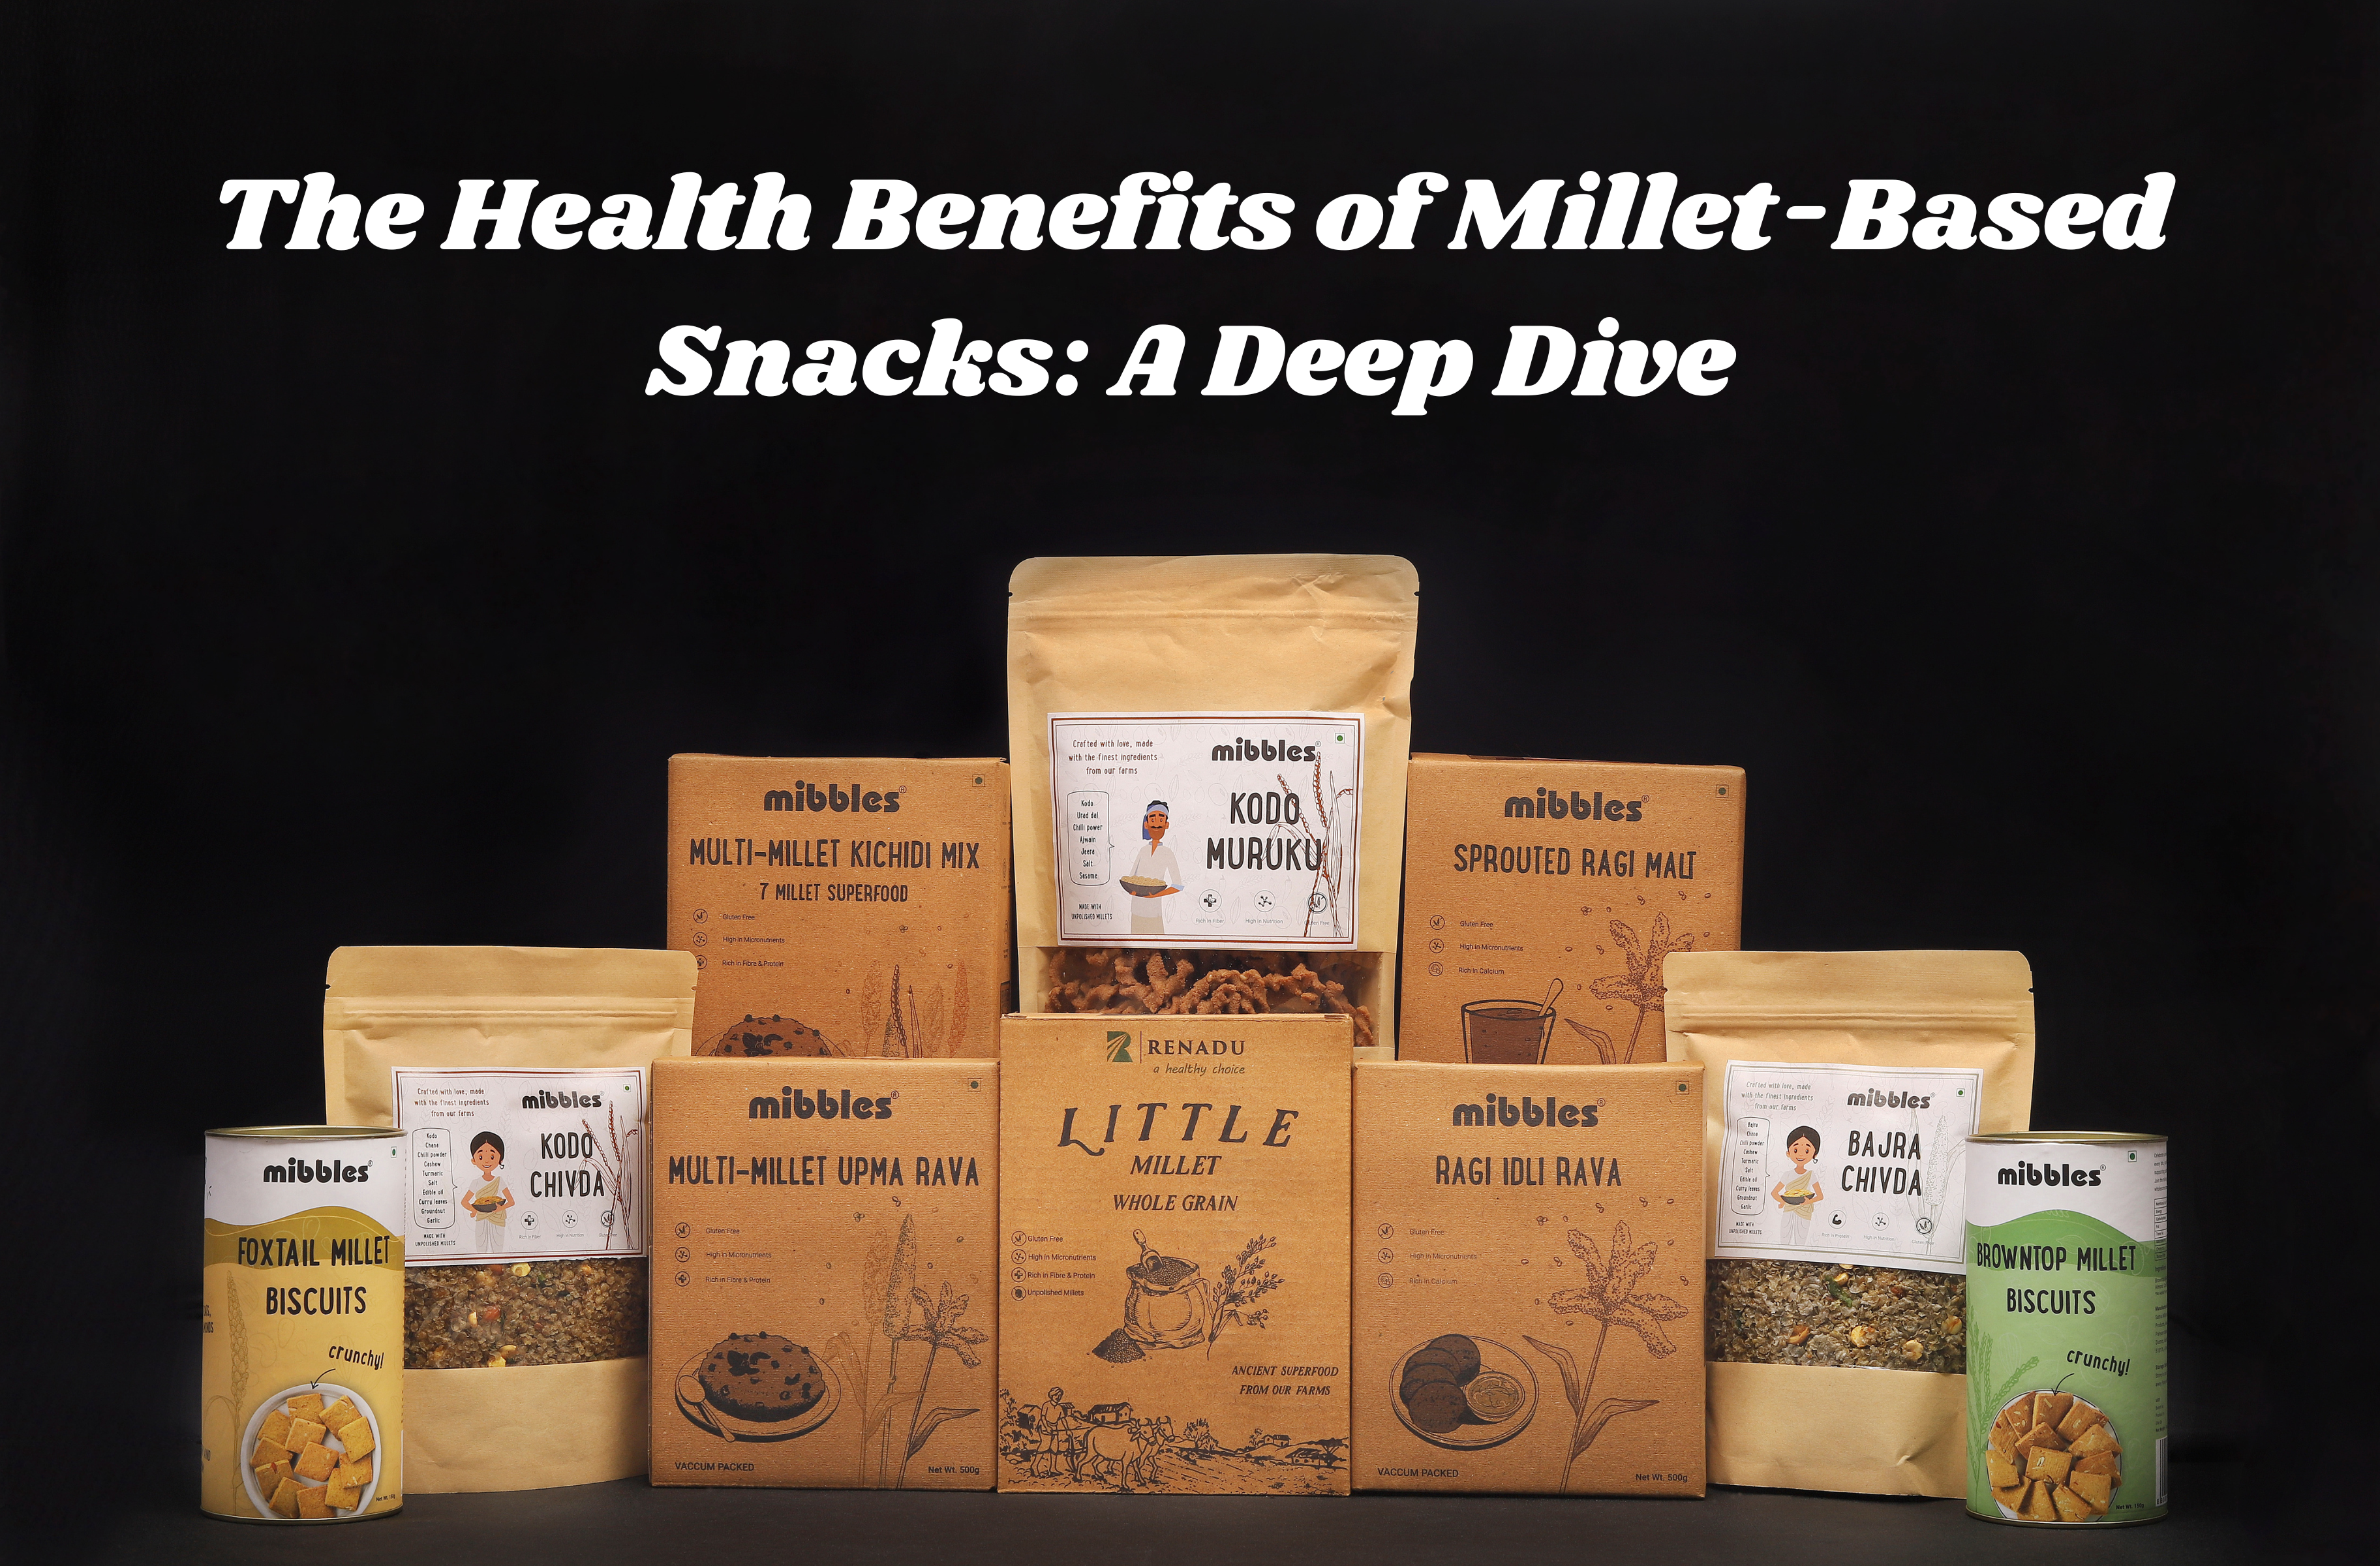 The Health Benefits of Millet-Based Snacks: A Deep Dive